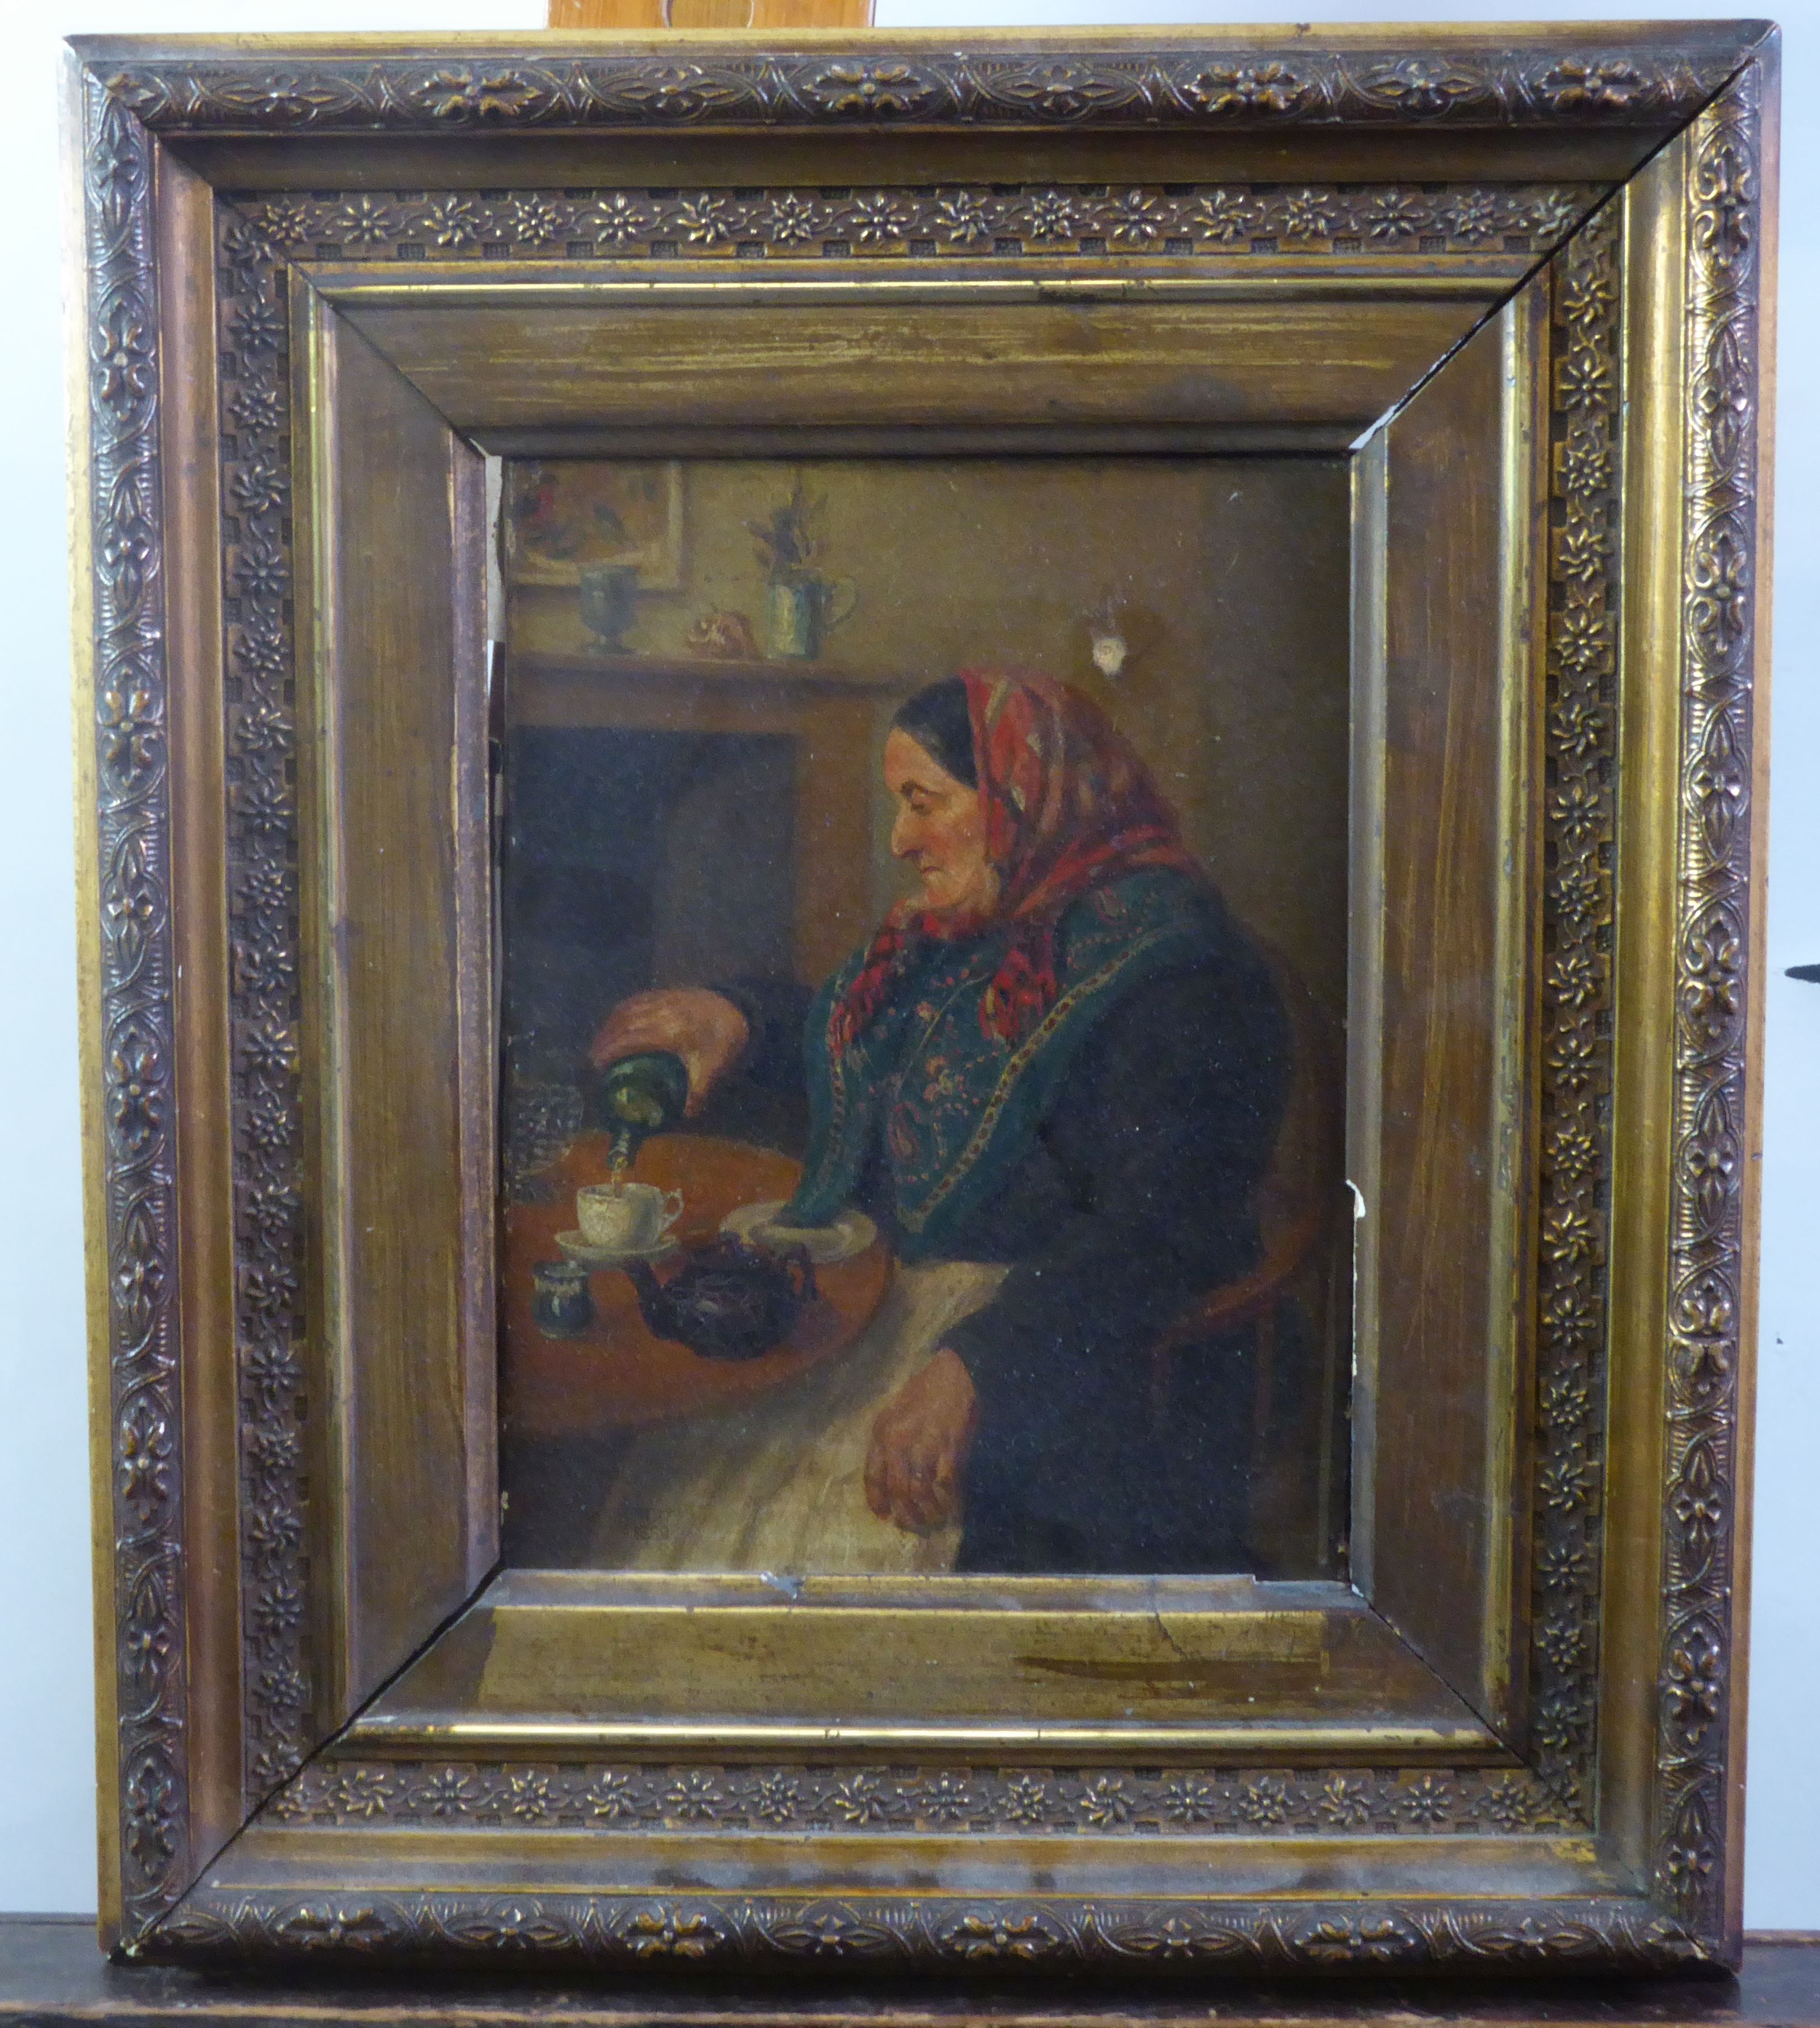 UNATTRIBUTED (NINETEENTH CENTURY BRITISH SCHOOL) OIL ON CANVAS Woman in head scarf sat at a table,